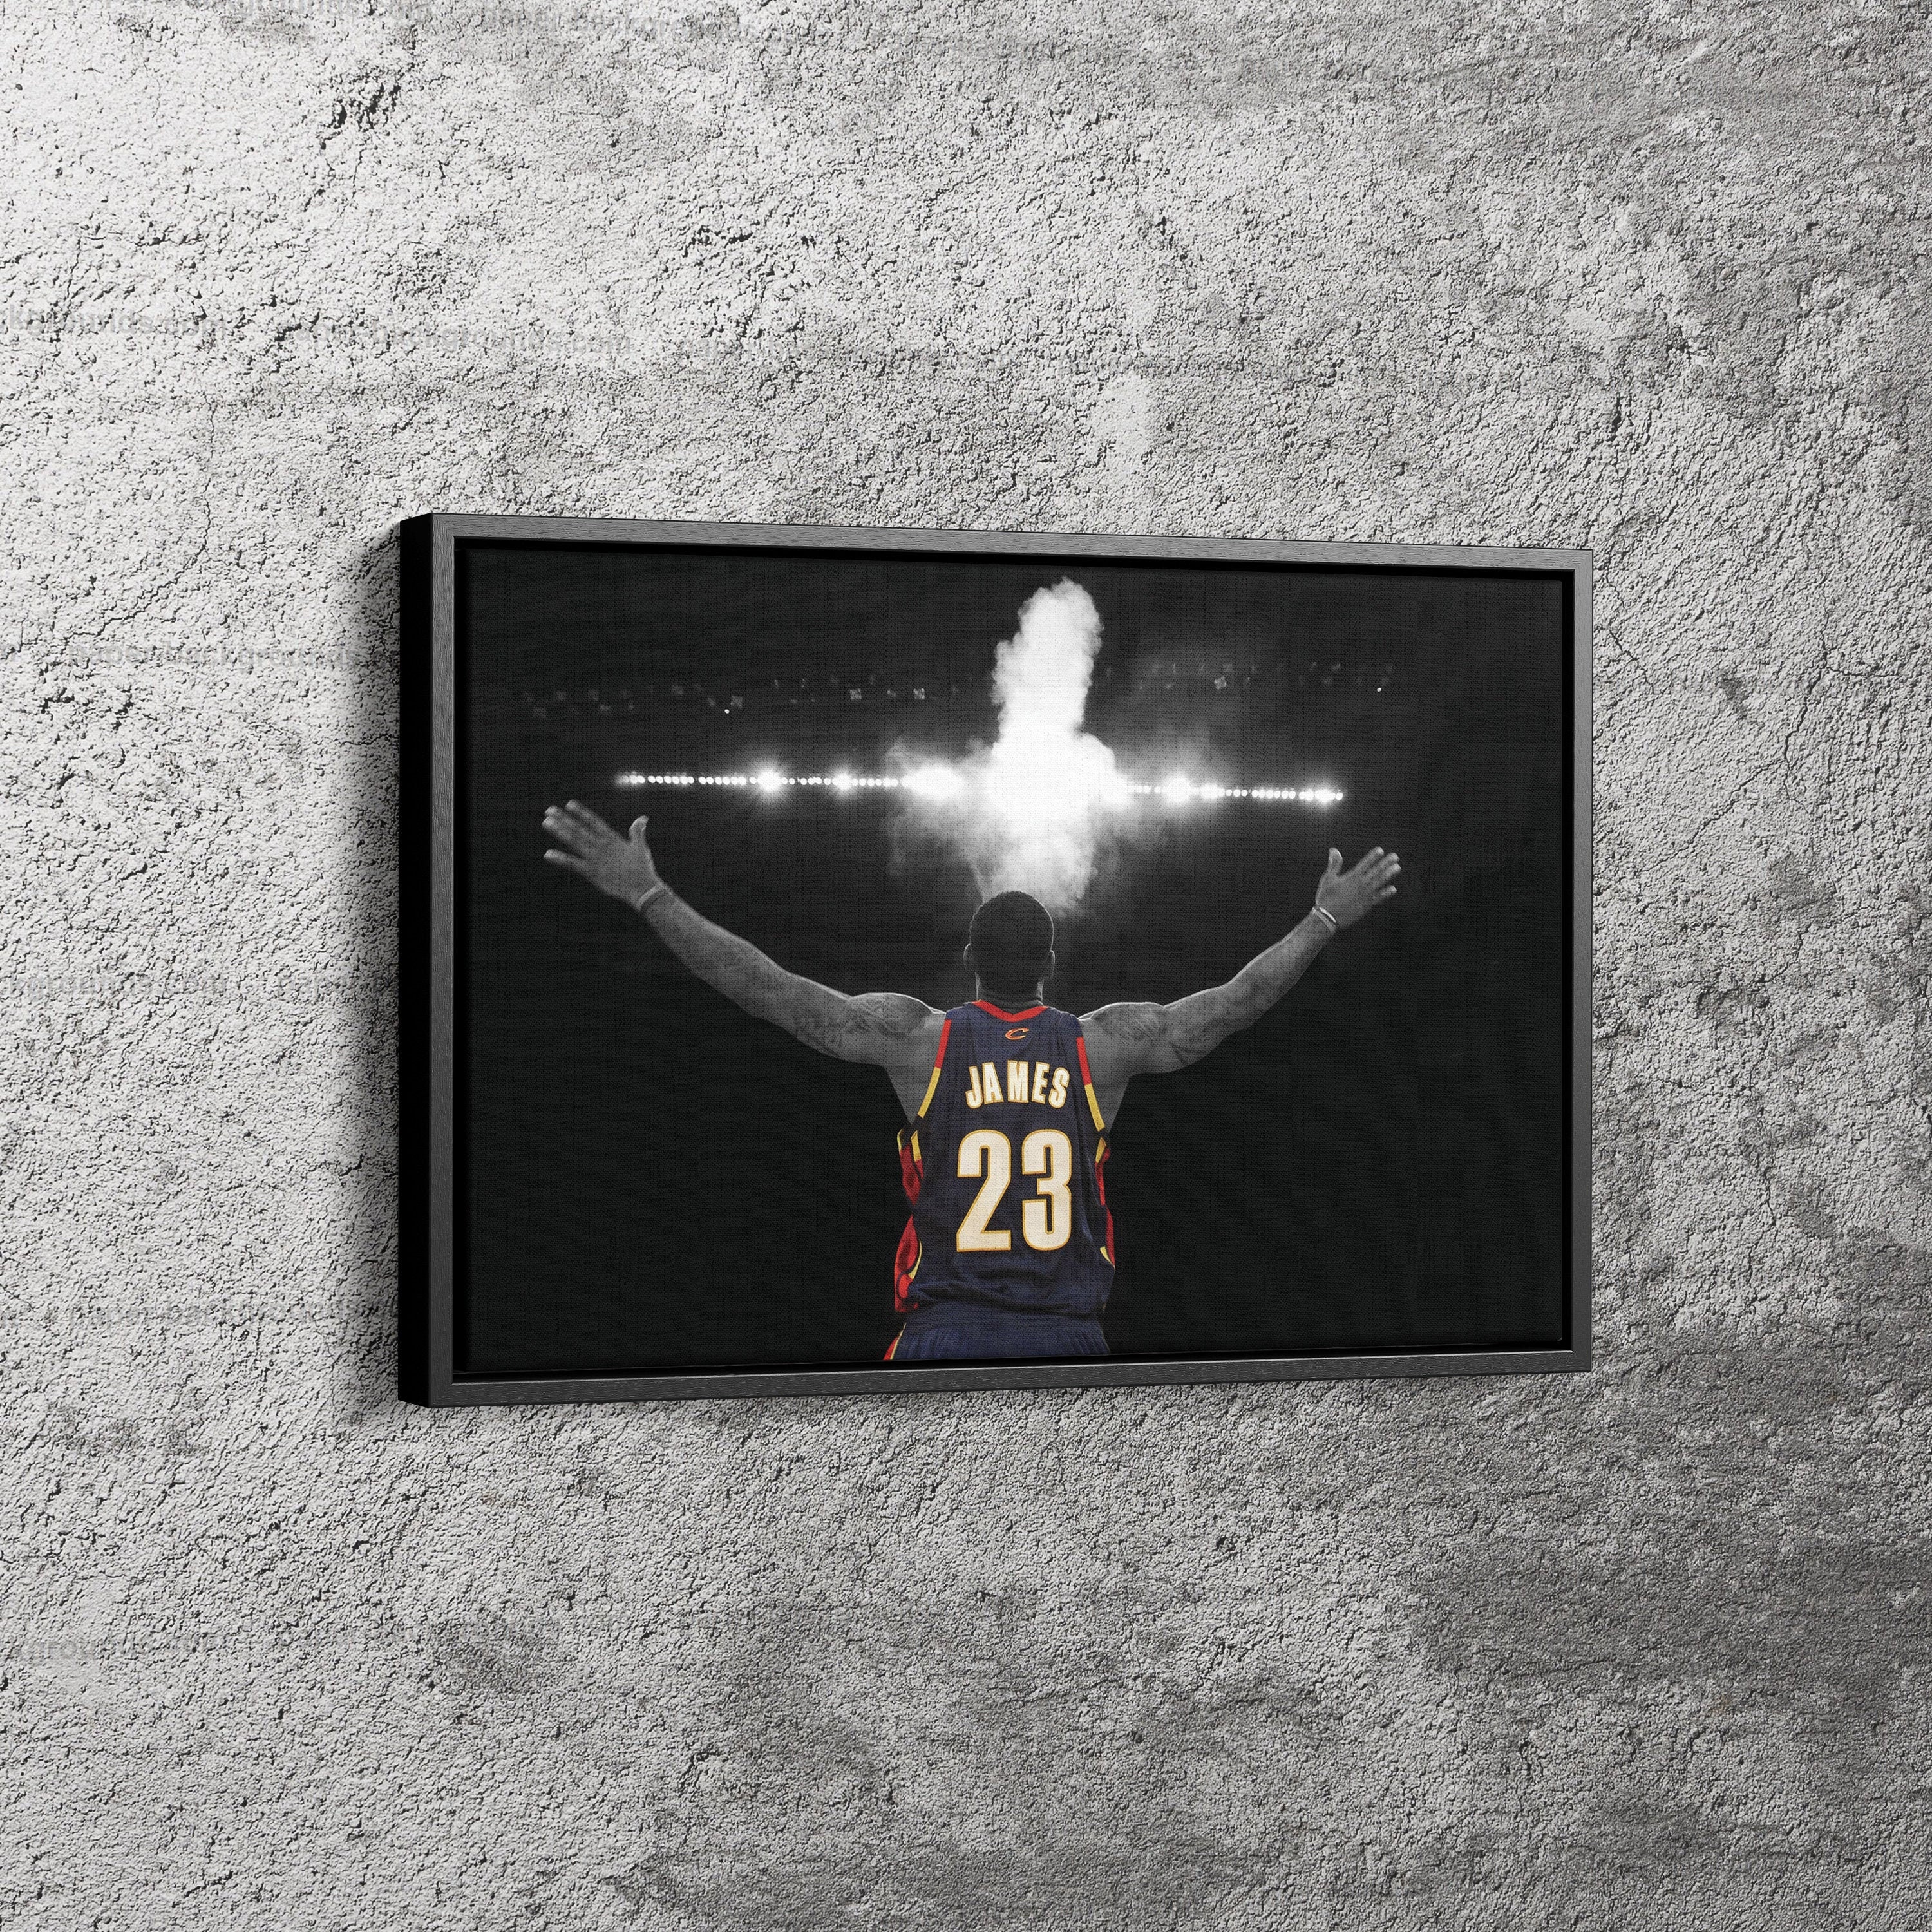  ORIMAMI Signed Black Superstar LeBron James Poster Framed Photo  Decor with 1x35mm Film Display,Cool Gifts for Basketball Lover/LeBron James  Fans - 8x6 Inches : Sports & Outdoors